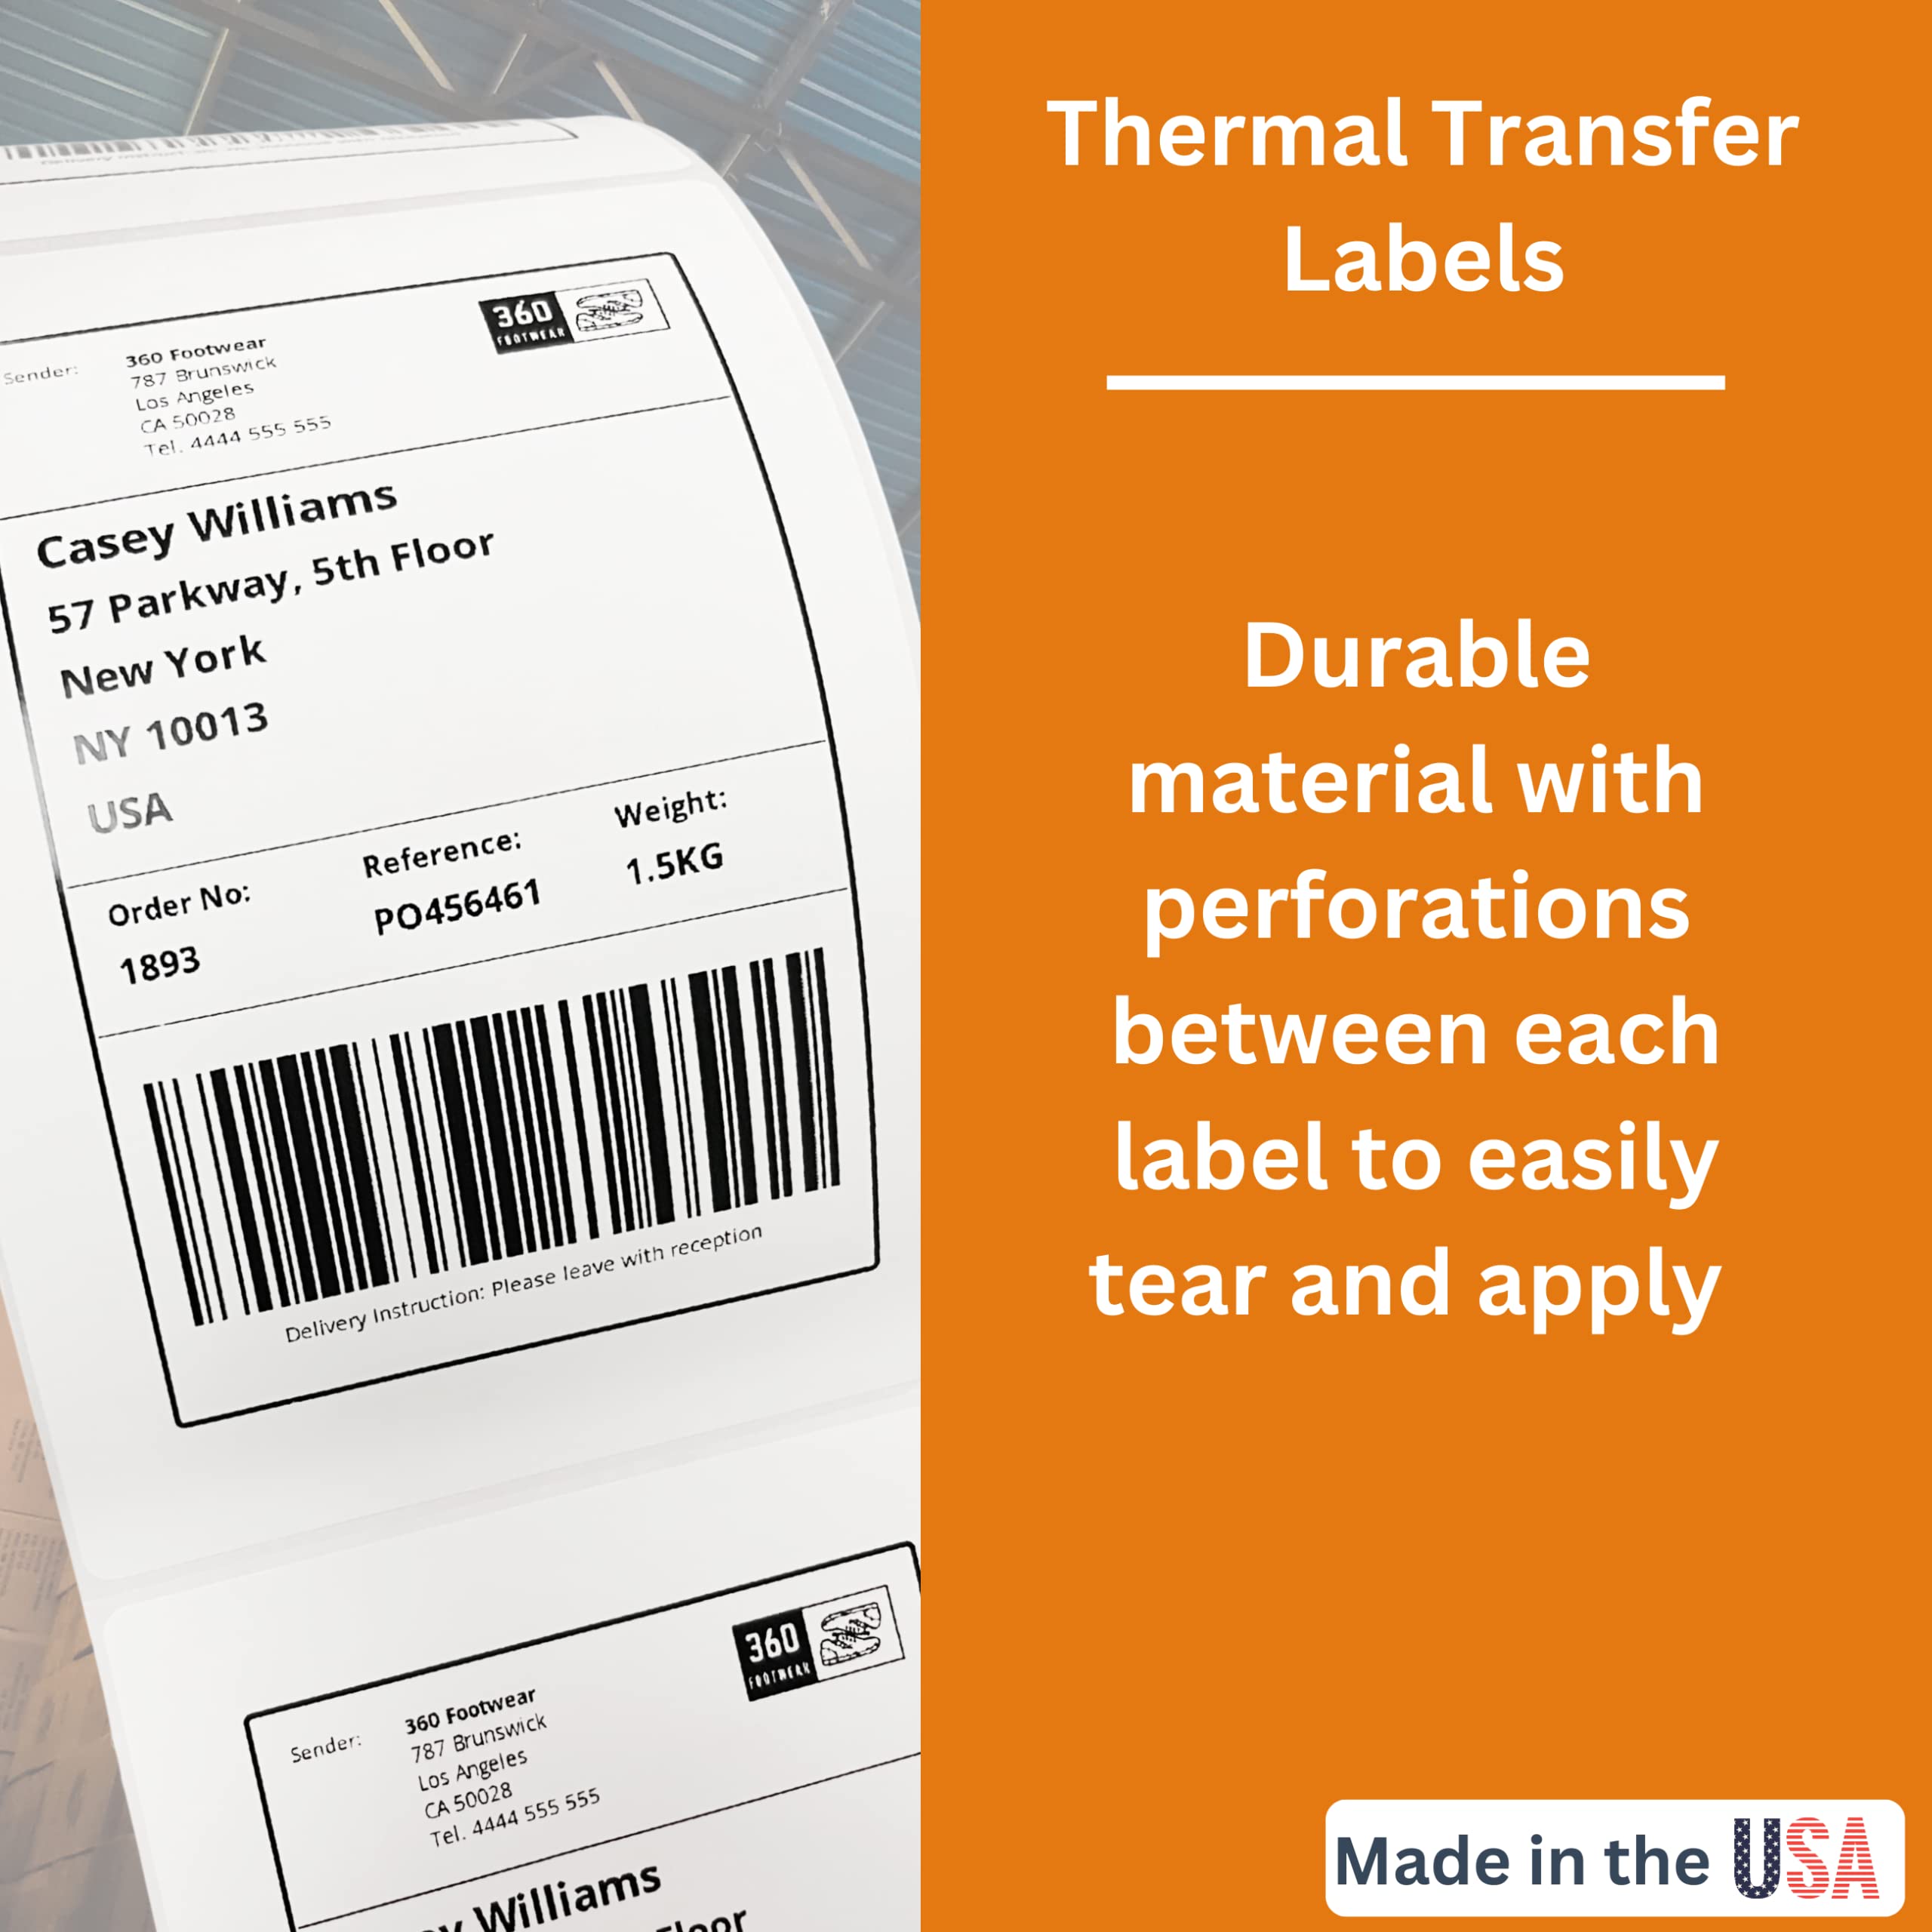 ATL Direct - Thermal Transfer Shipping Labels 4x6 1,000, 4x6 Thermal Labels, Thermal Printer Labels 4x6, Label Printer Paper, Shipping Label Paper, Rollo Labels, Thermal Labels 4x6 roll, zebra labels